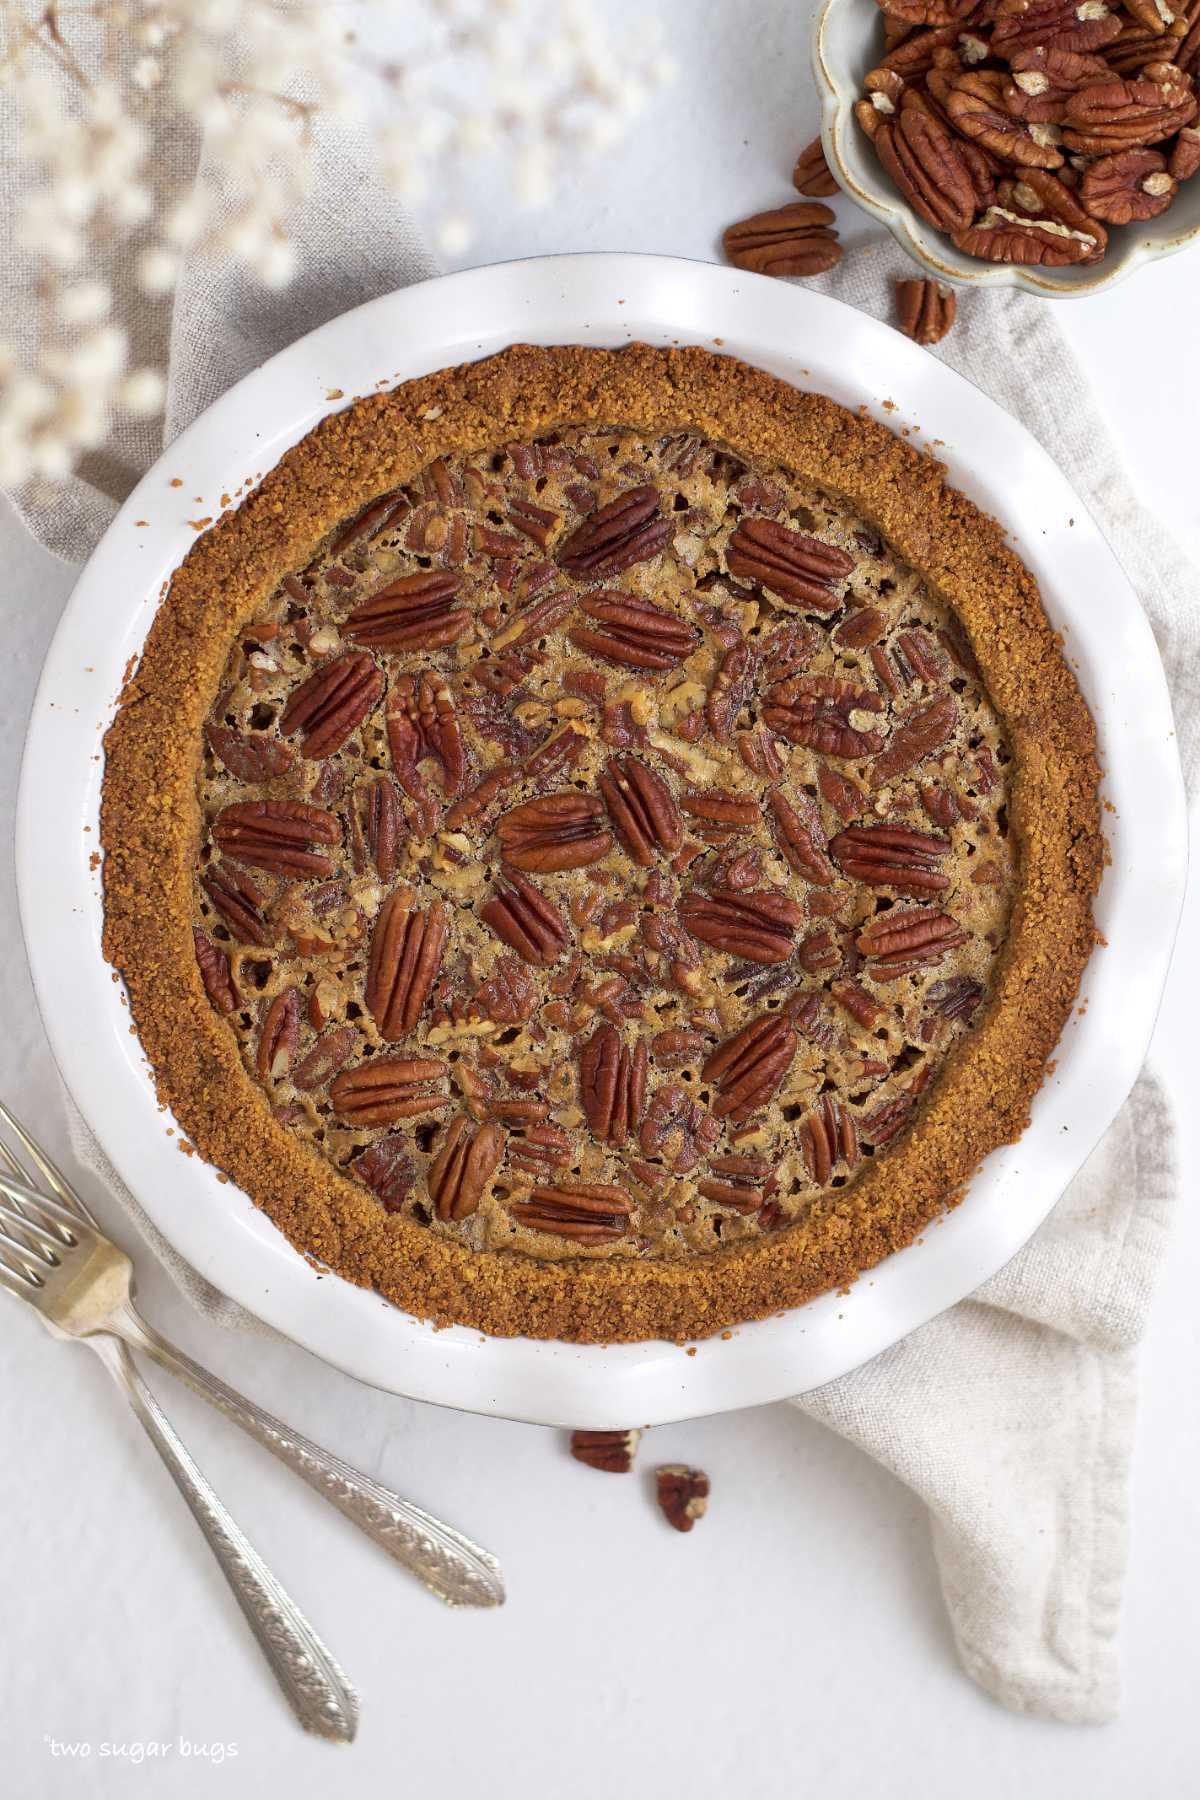 baked pecan pie with a bowl of pecans and forks